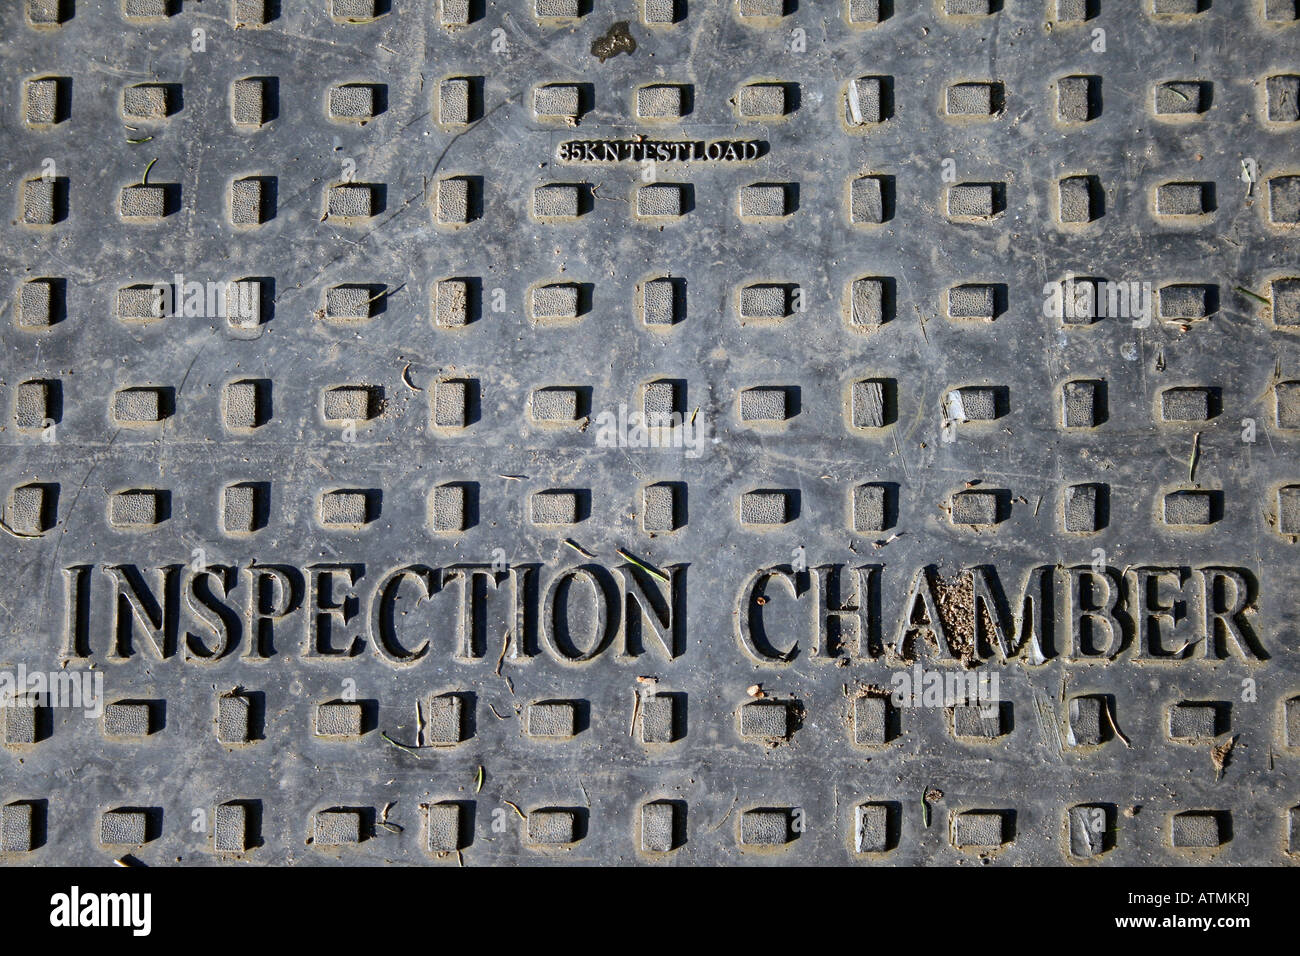 Man hole cover for an inspection chamber Stock Photo